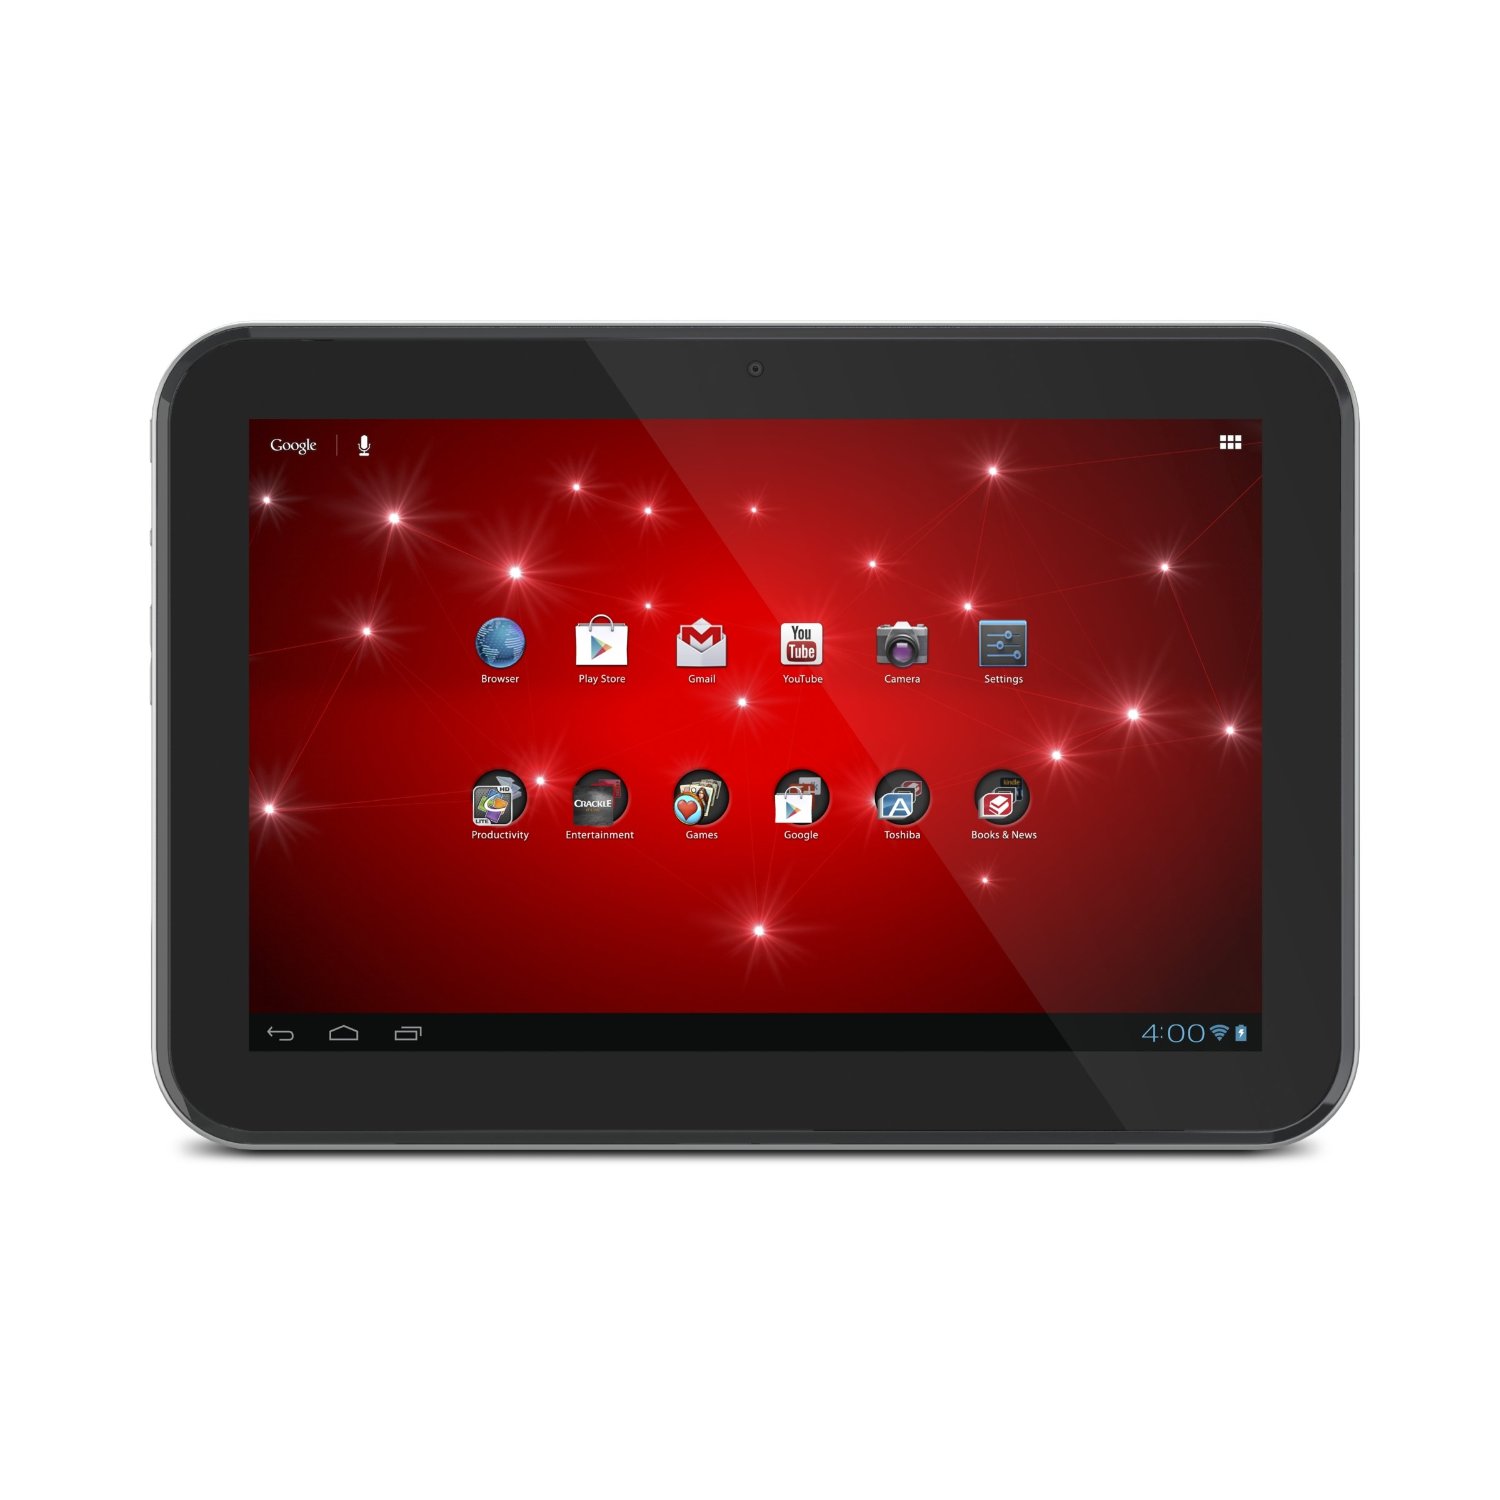 http://thetechjournal.com/wp-content/uploads/images/1206/1340174474-toshiba-excite-101inch-tablet-powered-by-android-40-1.jpg